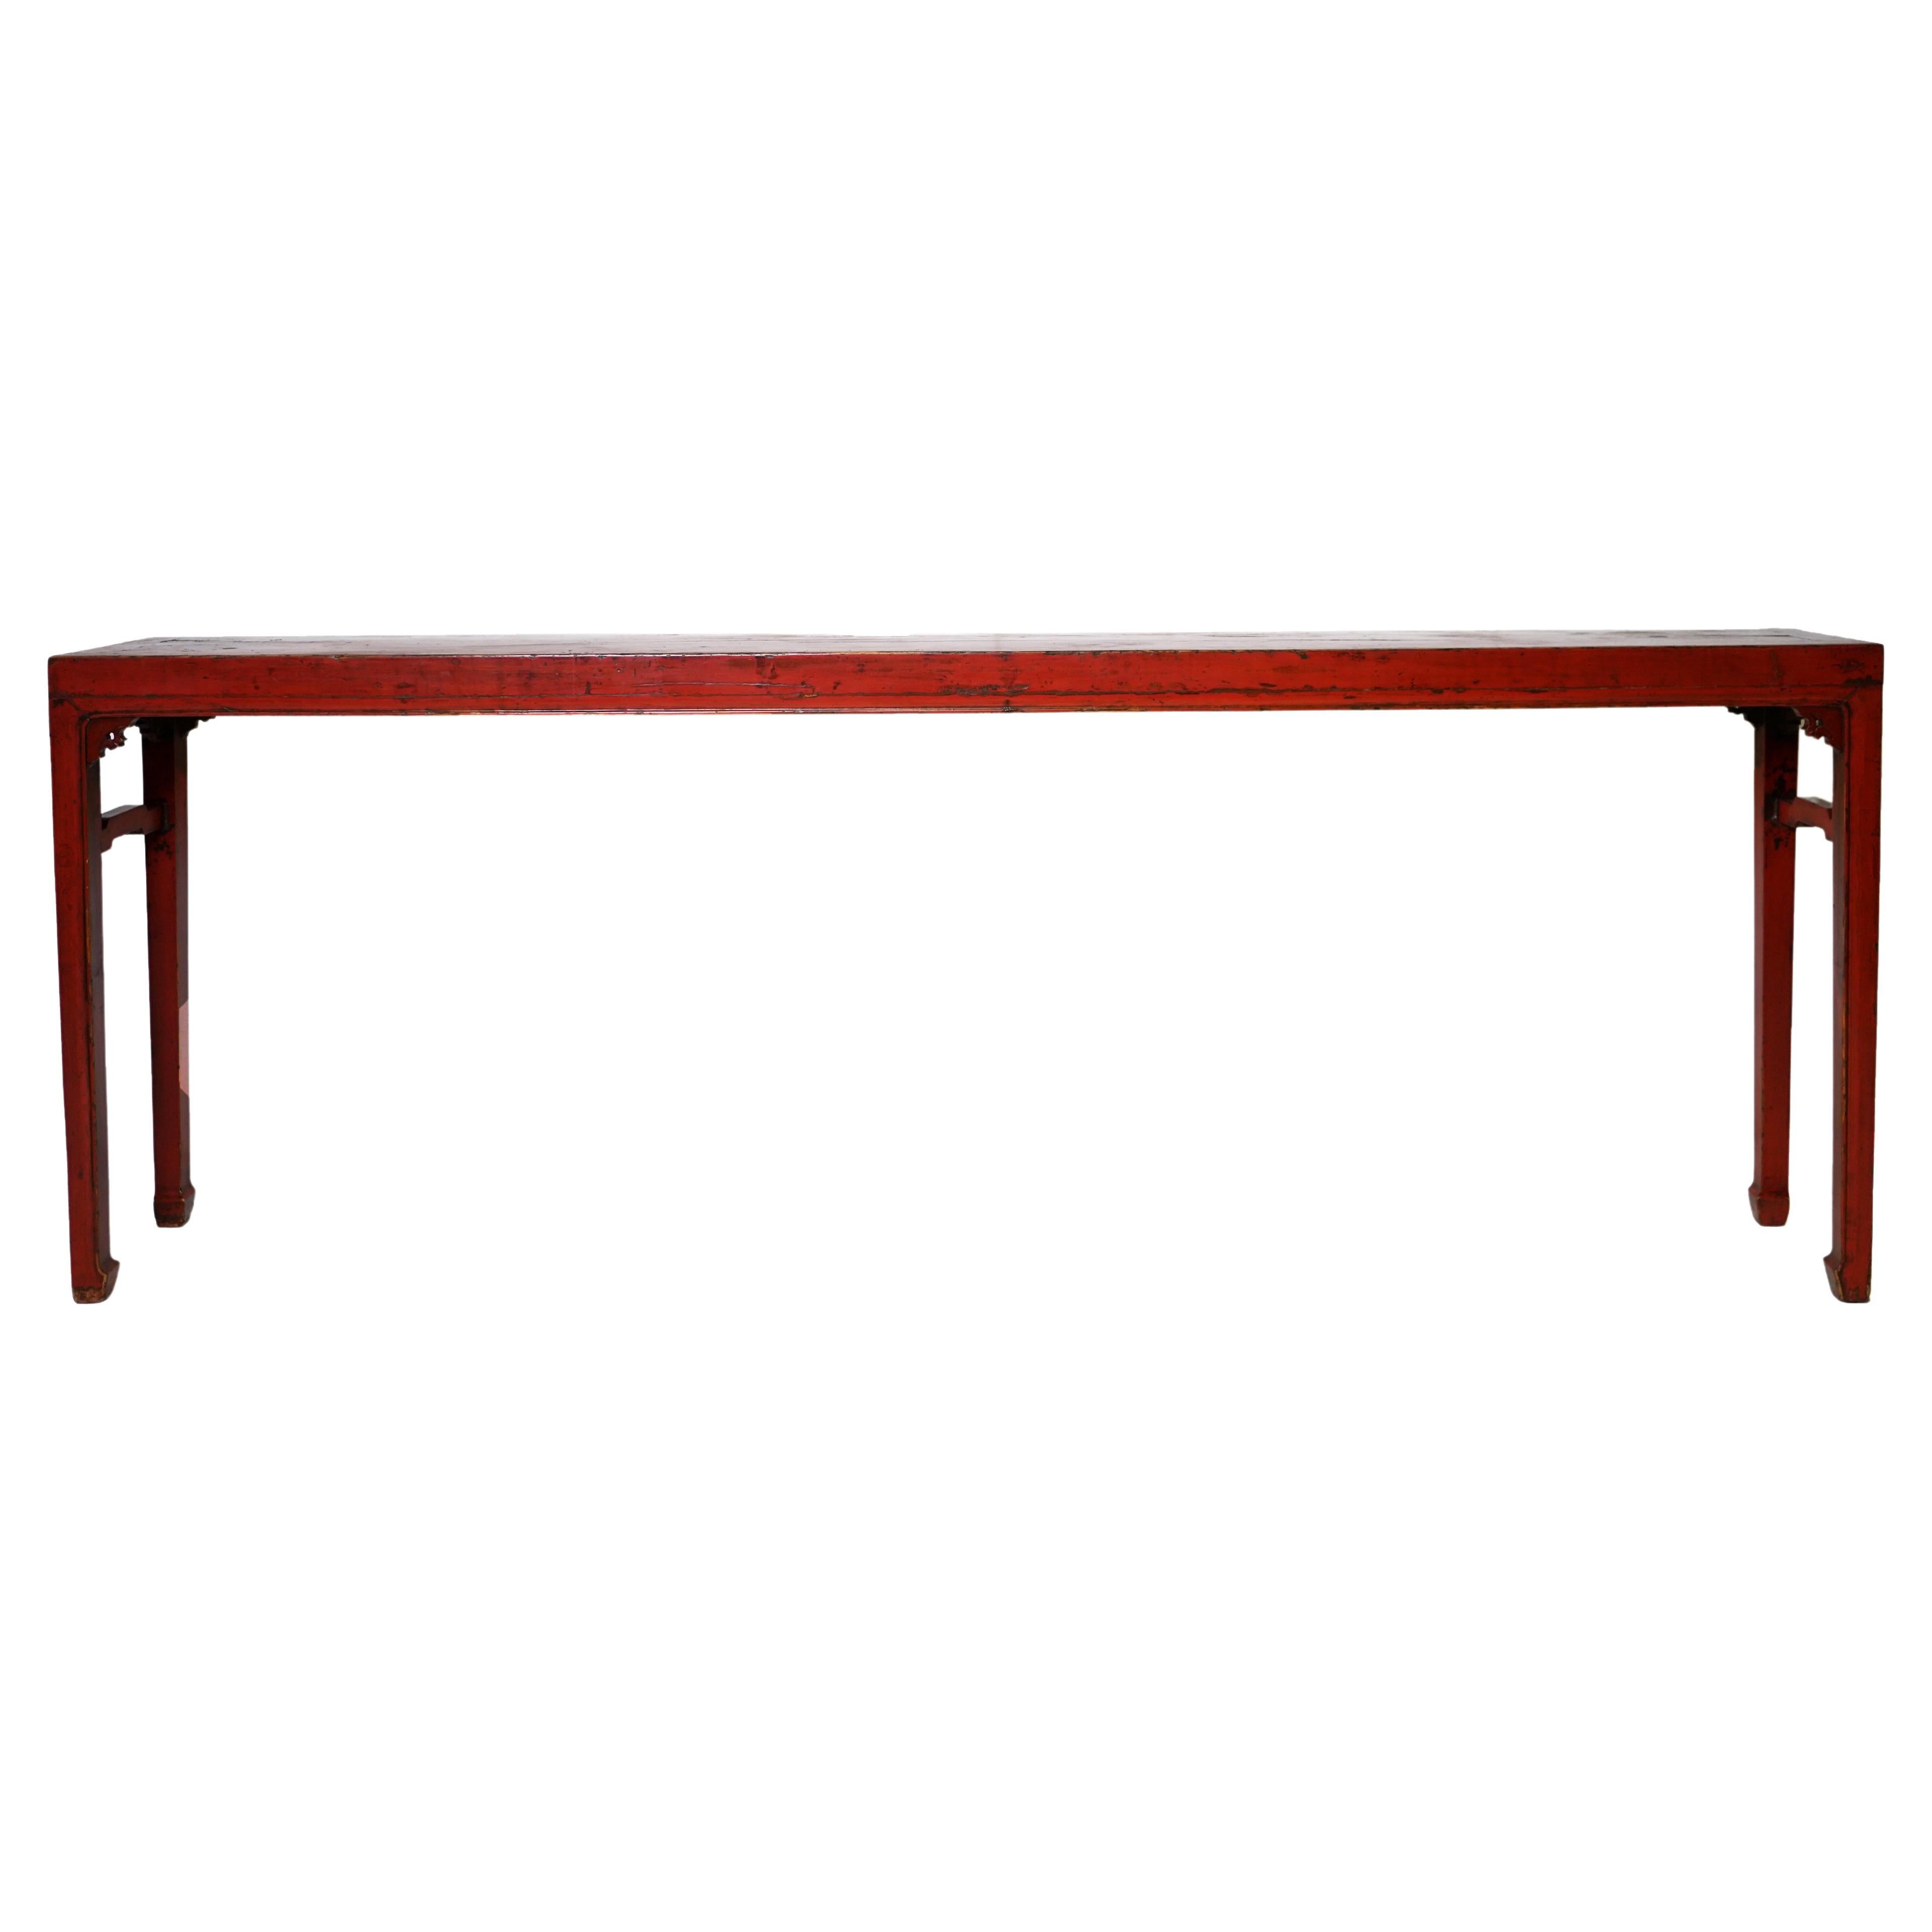 20th Century Chinese Narrow Altar Table